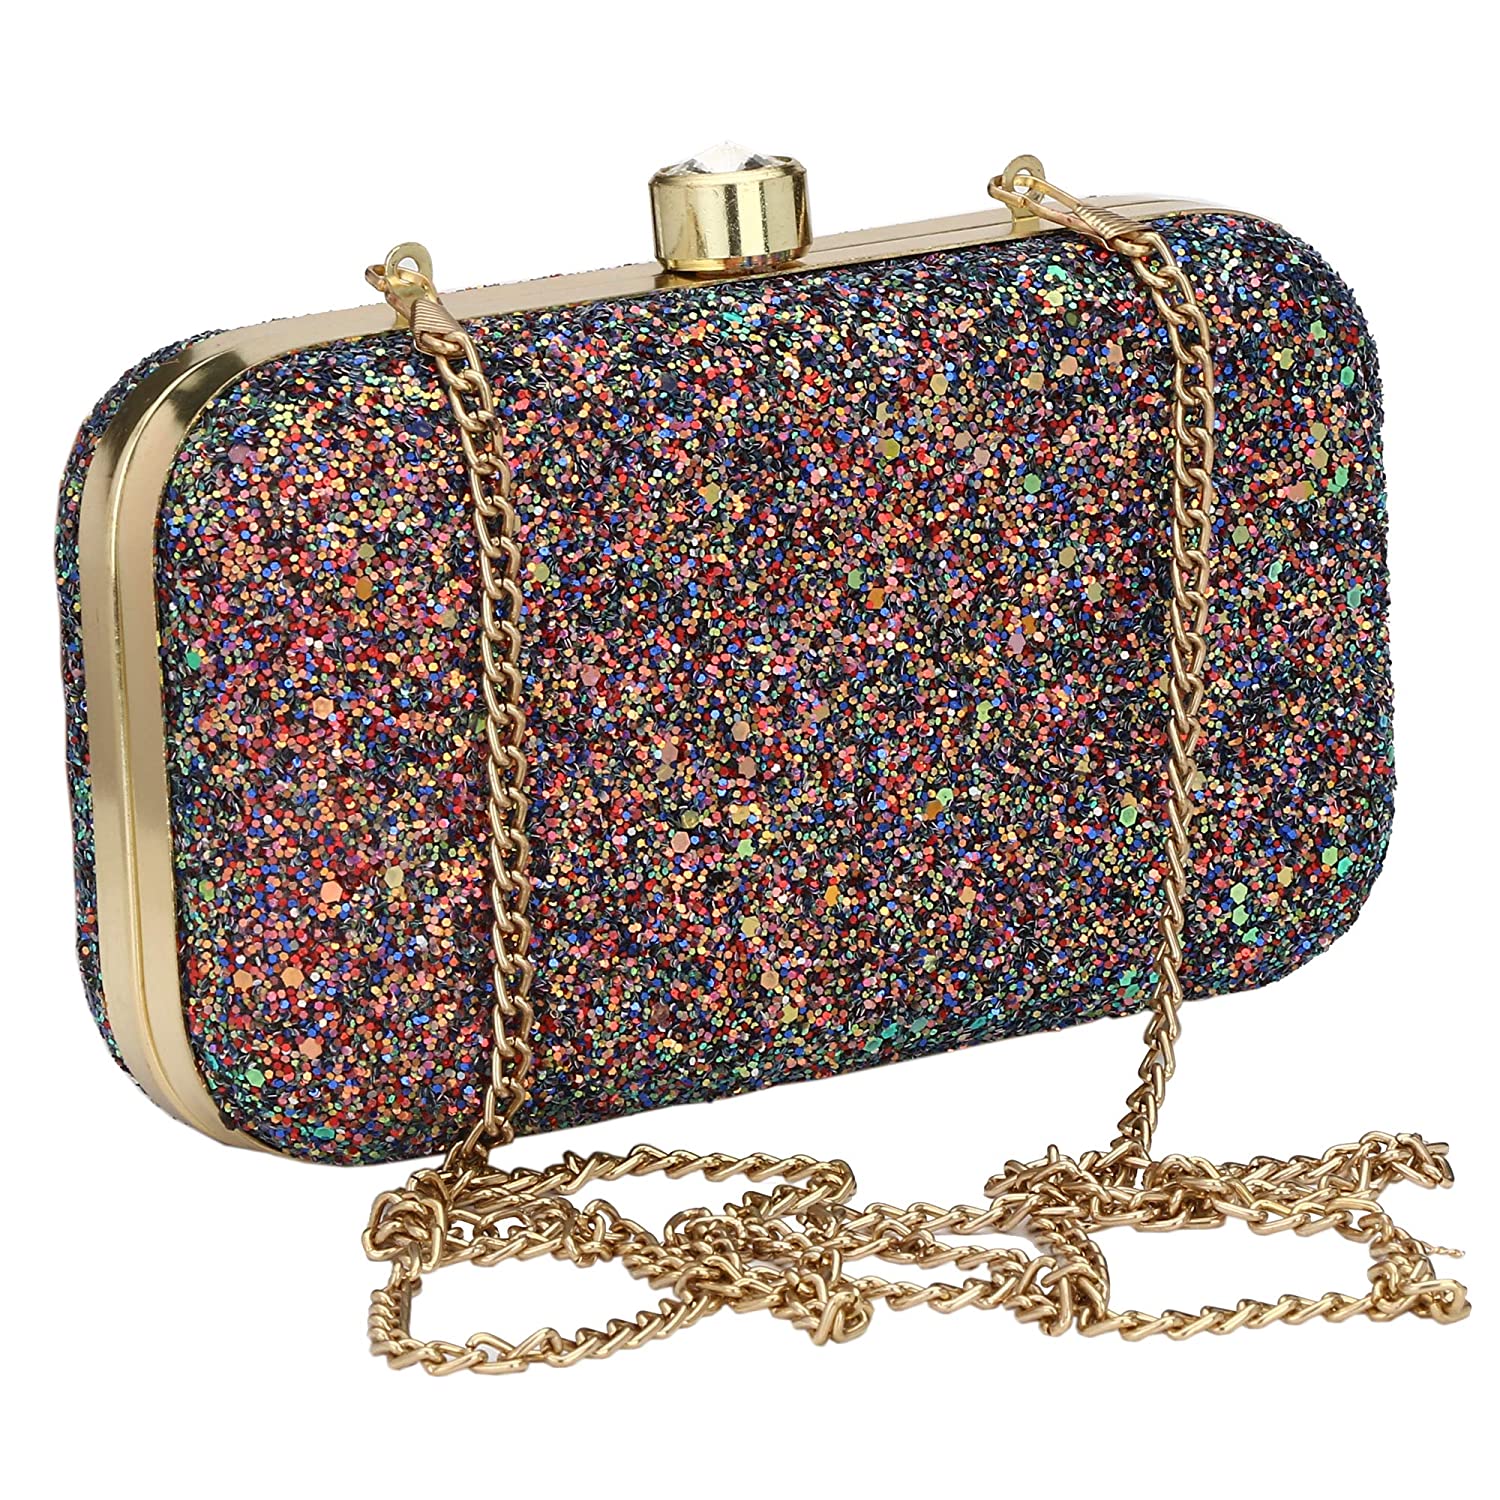 Golden Synthetic Embroidered Clutch 188259 | Fancy clutch purse, Clutch  fashion, Clutch